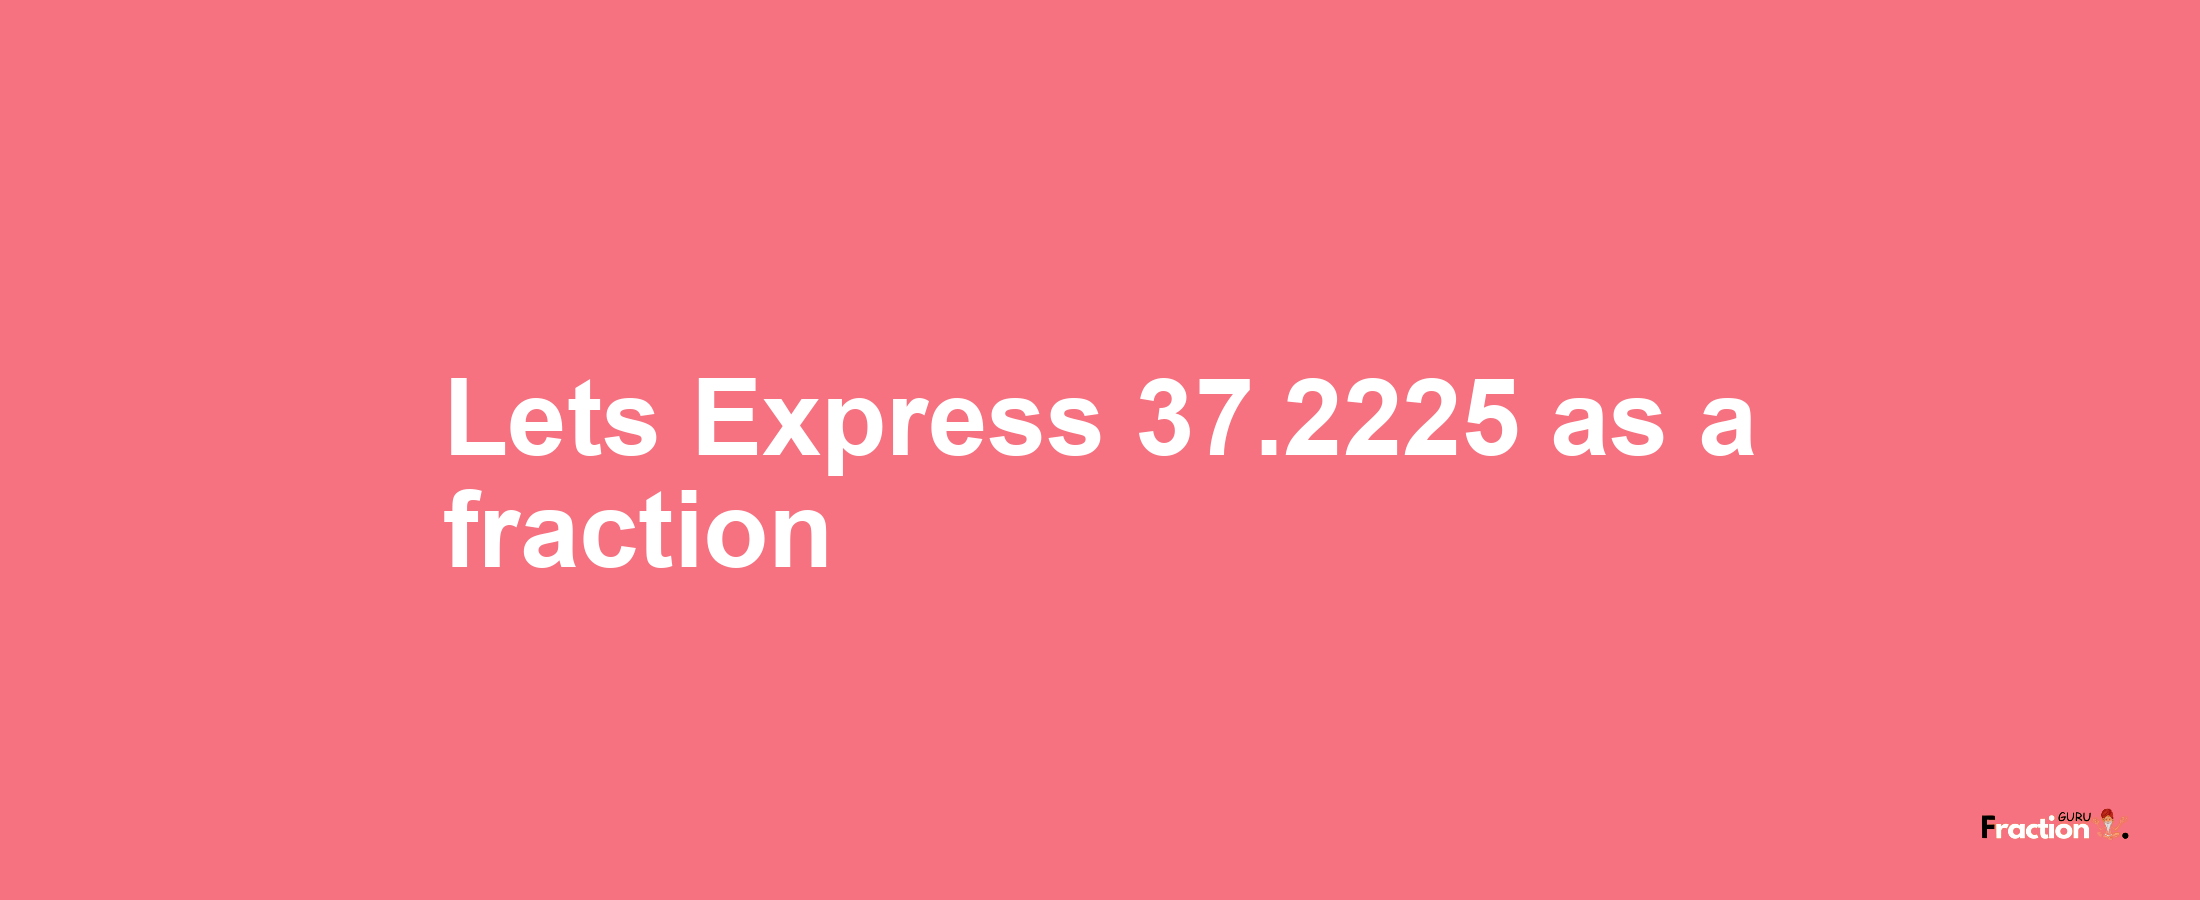 Lets Express 37.2225 as afraction